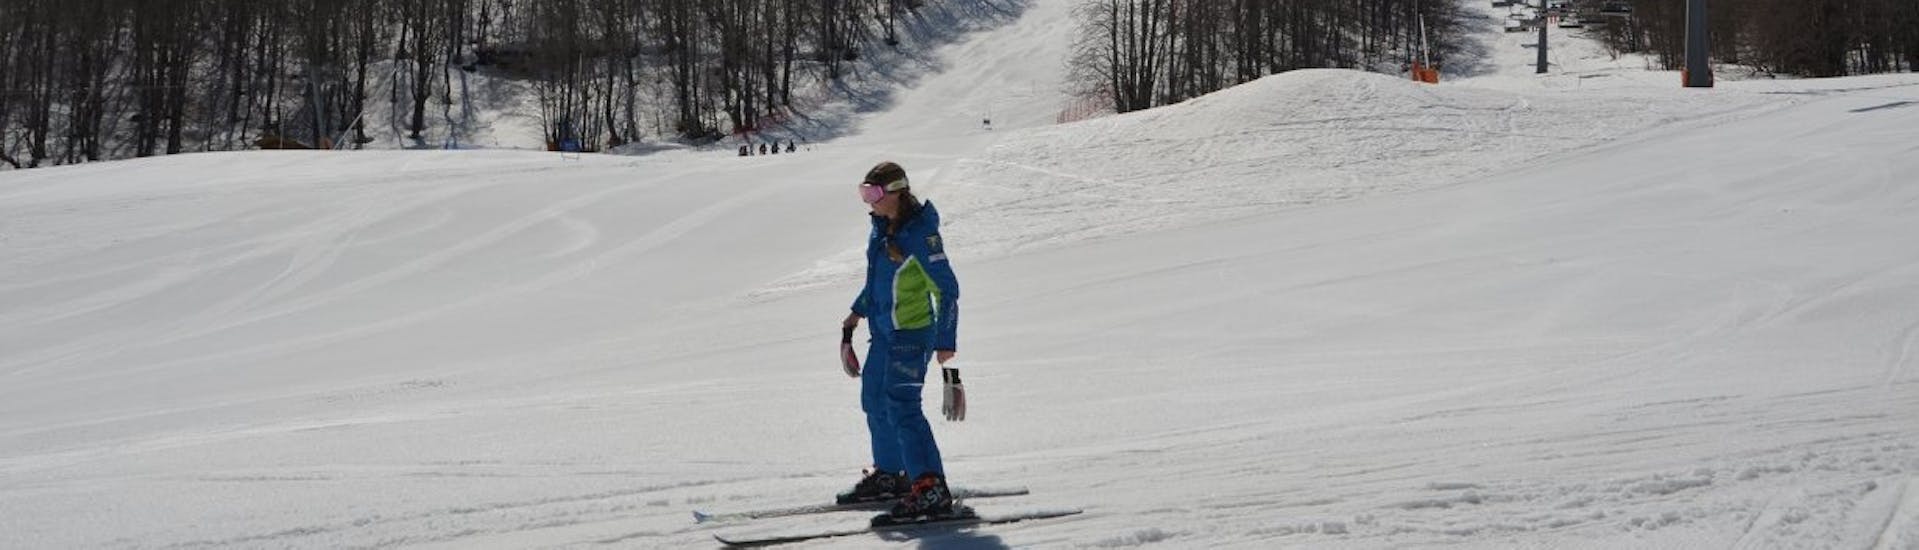 Ski instructor getting ready for one of the private ski lessons for adults of all levels in Campo Felice.